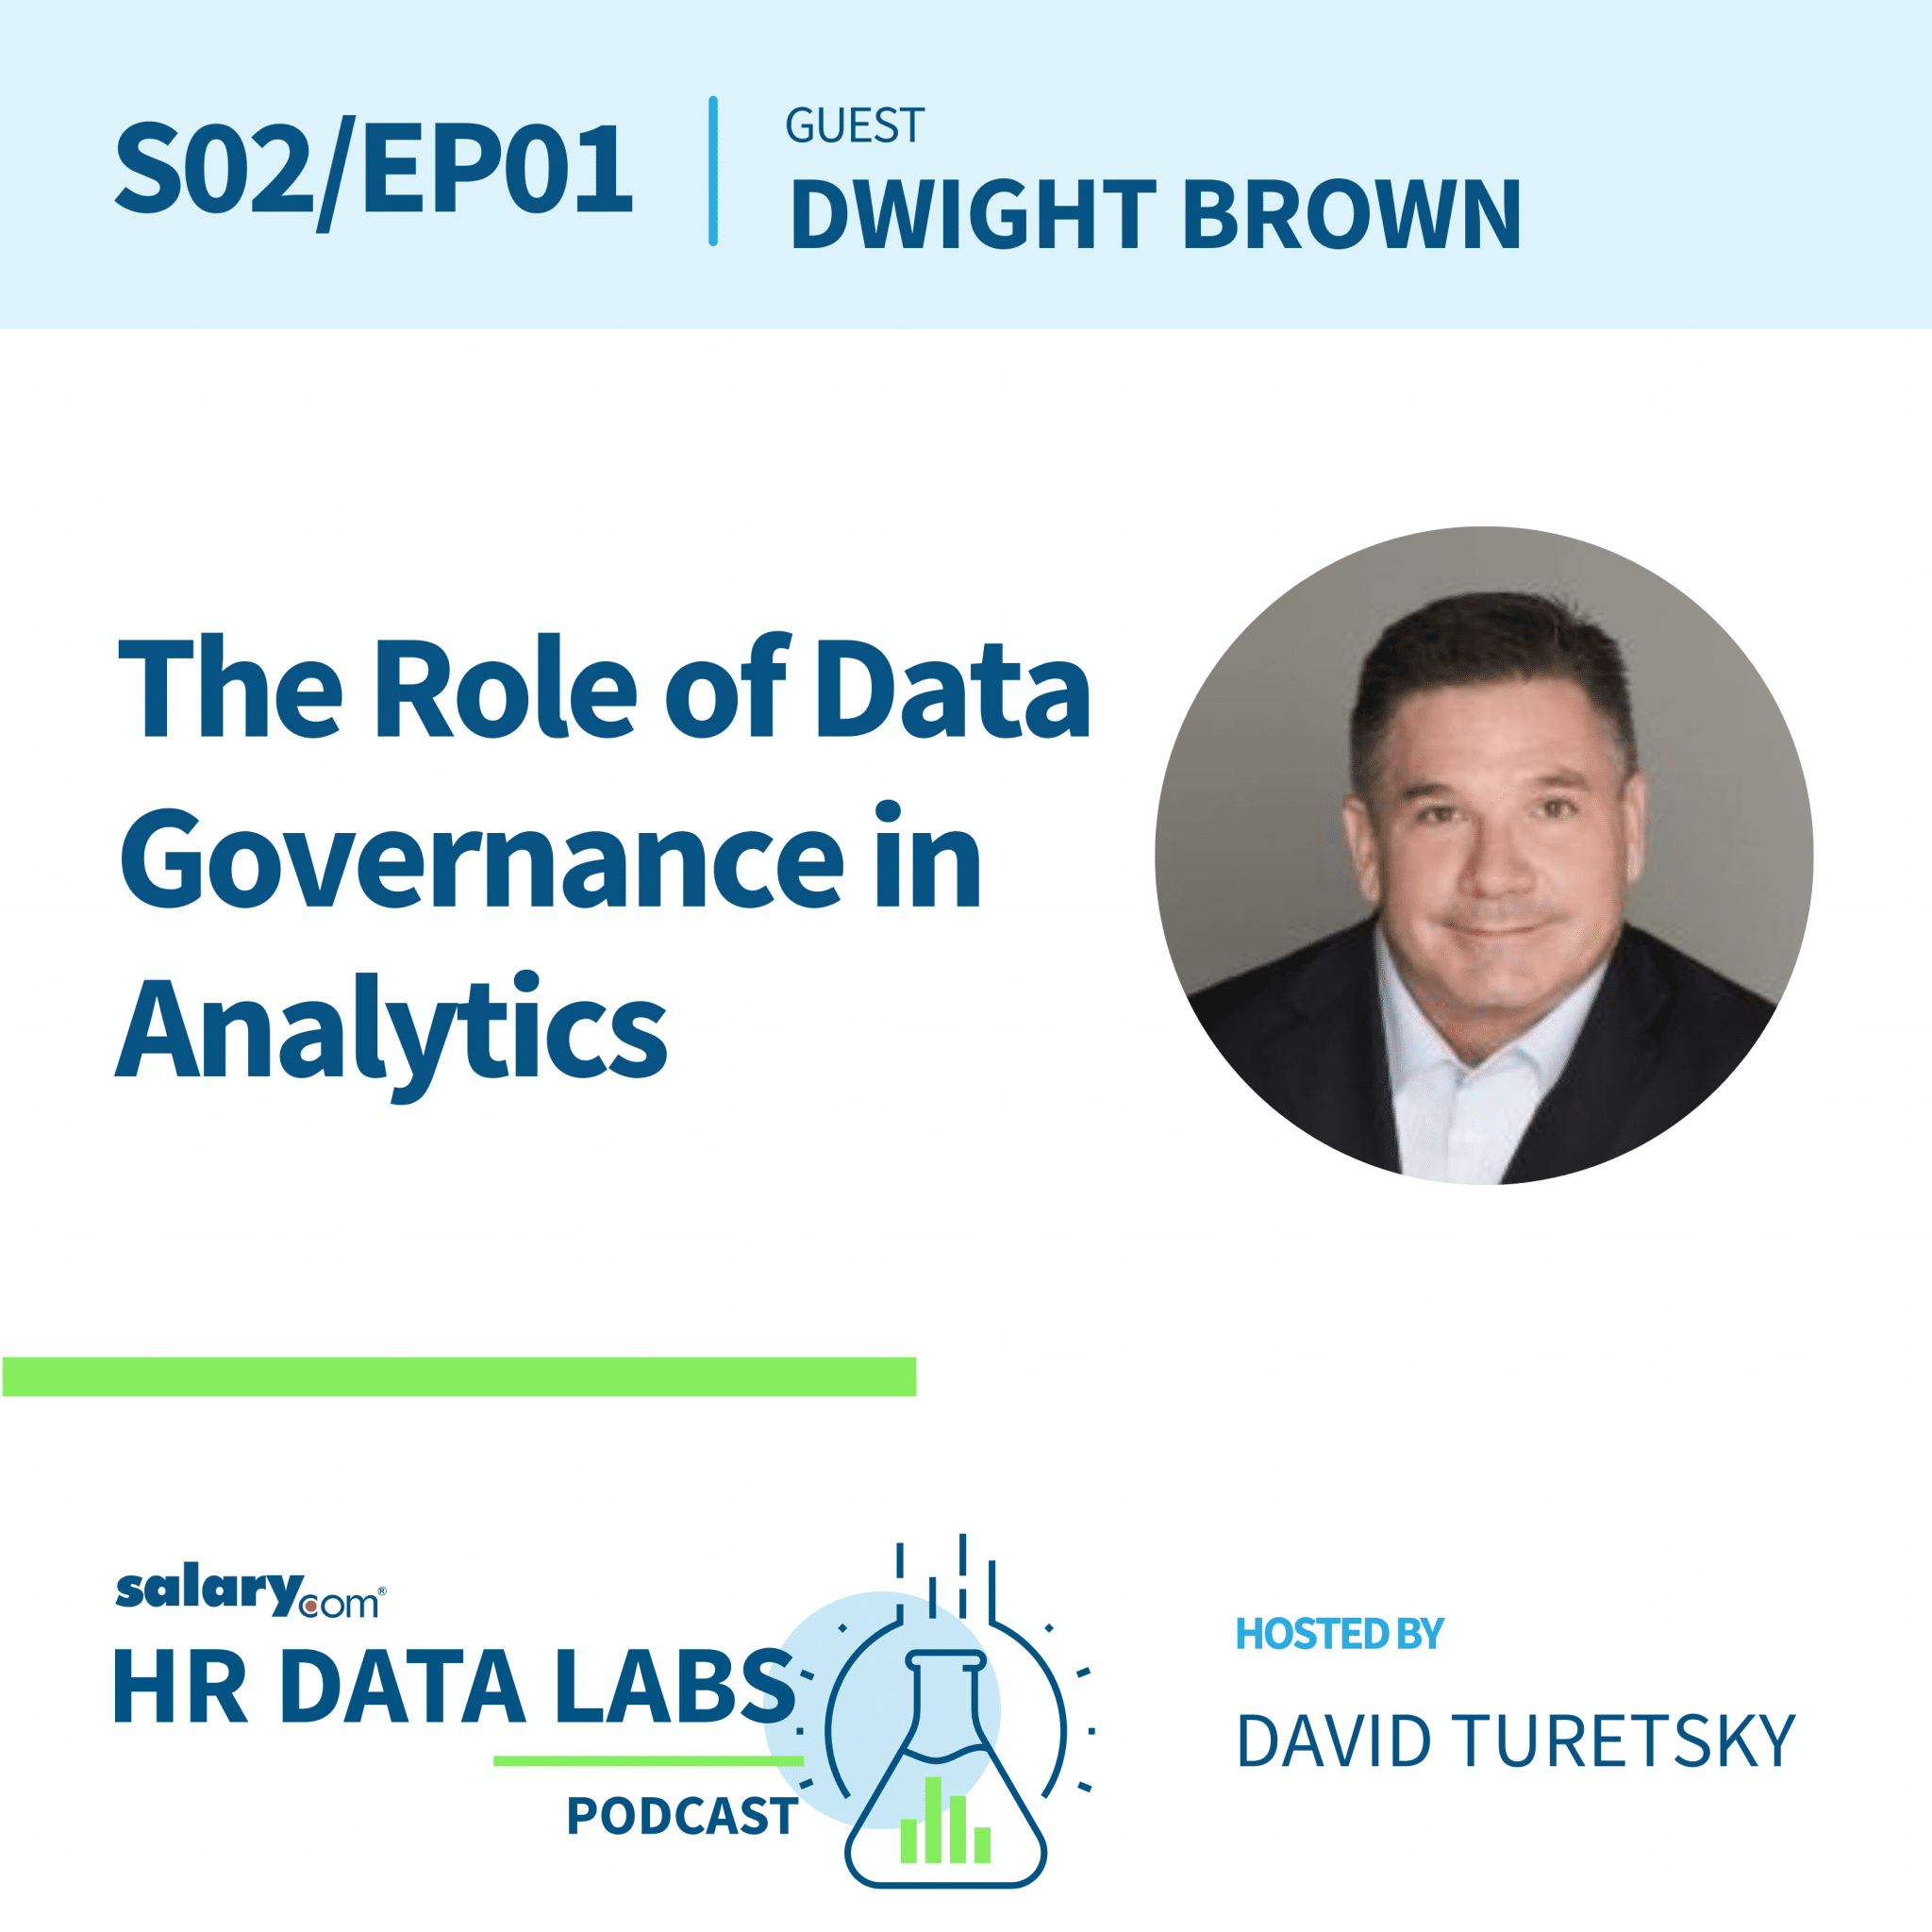 The Role of Data Governance in Analytics